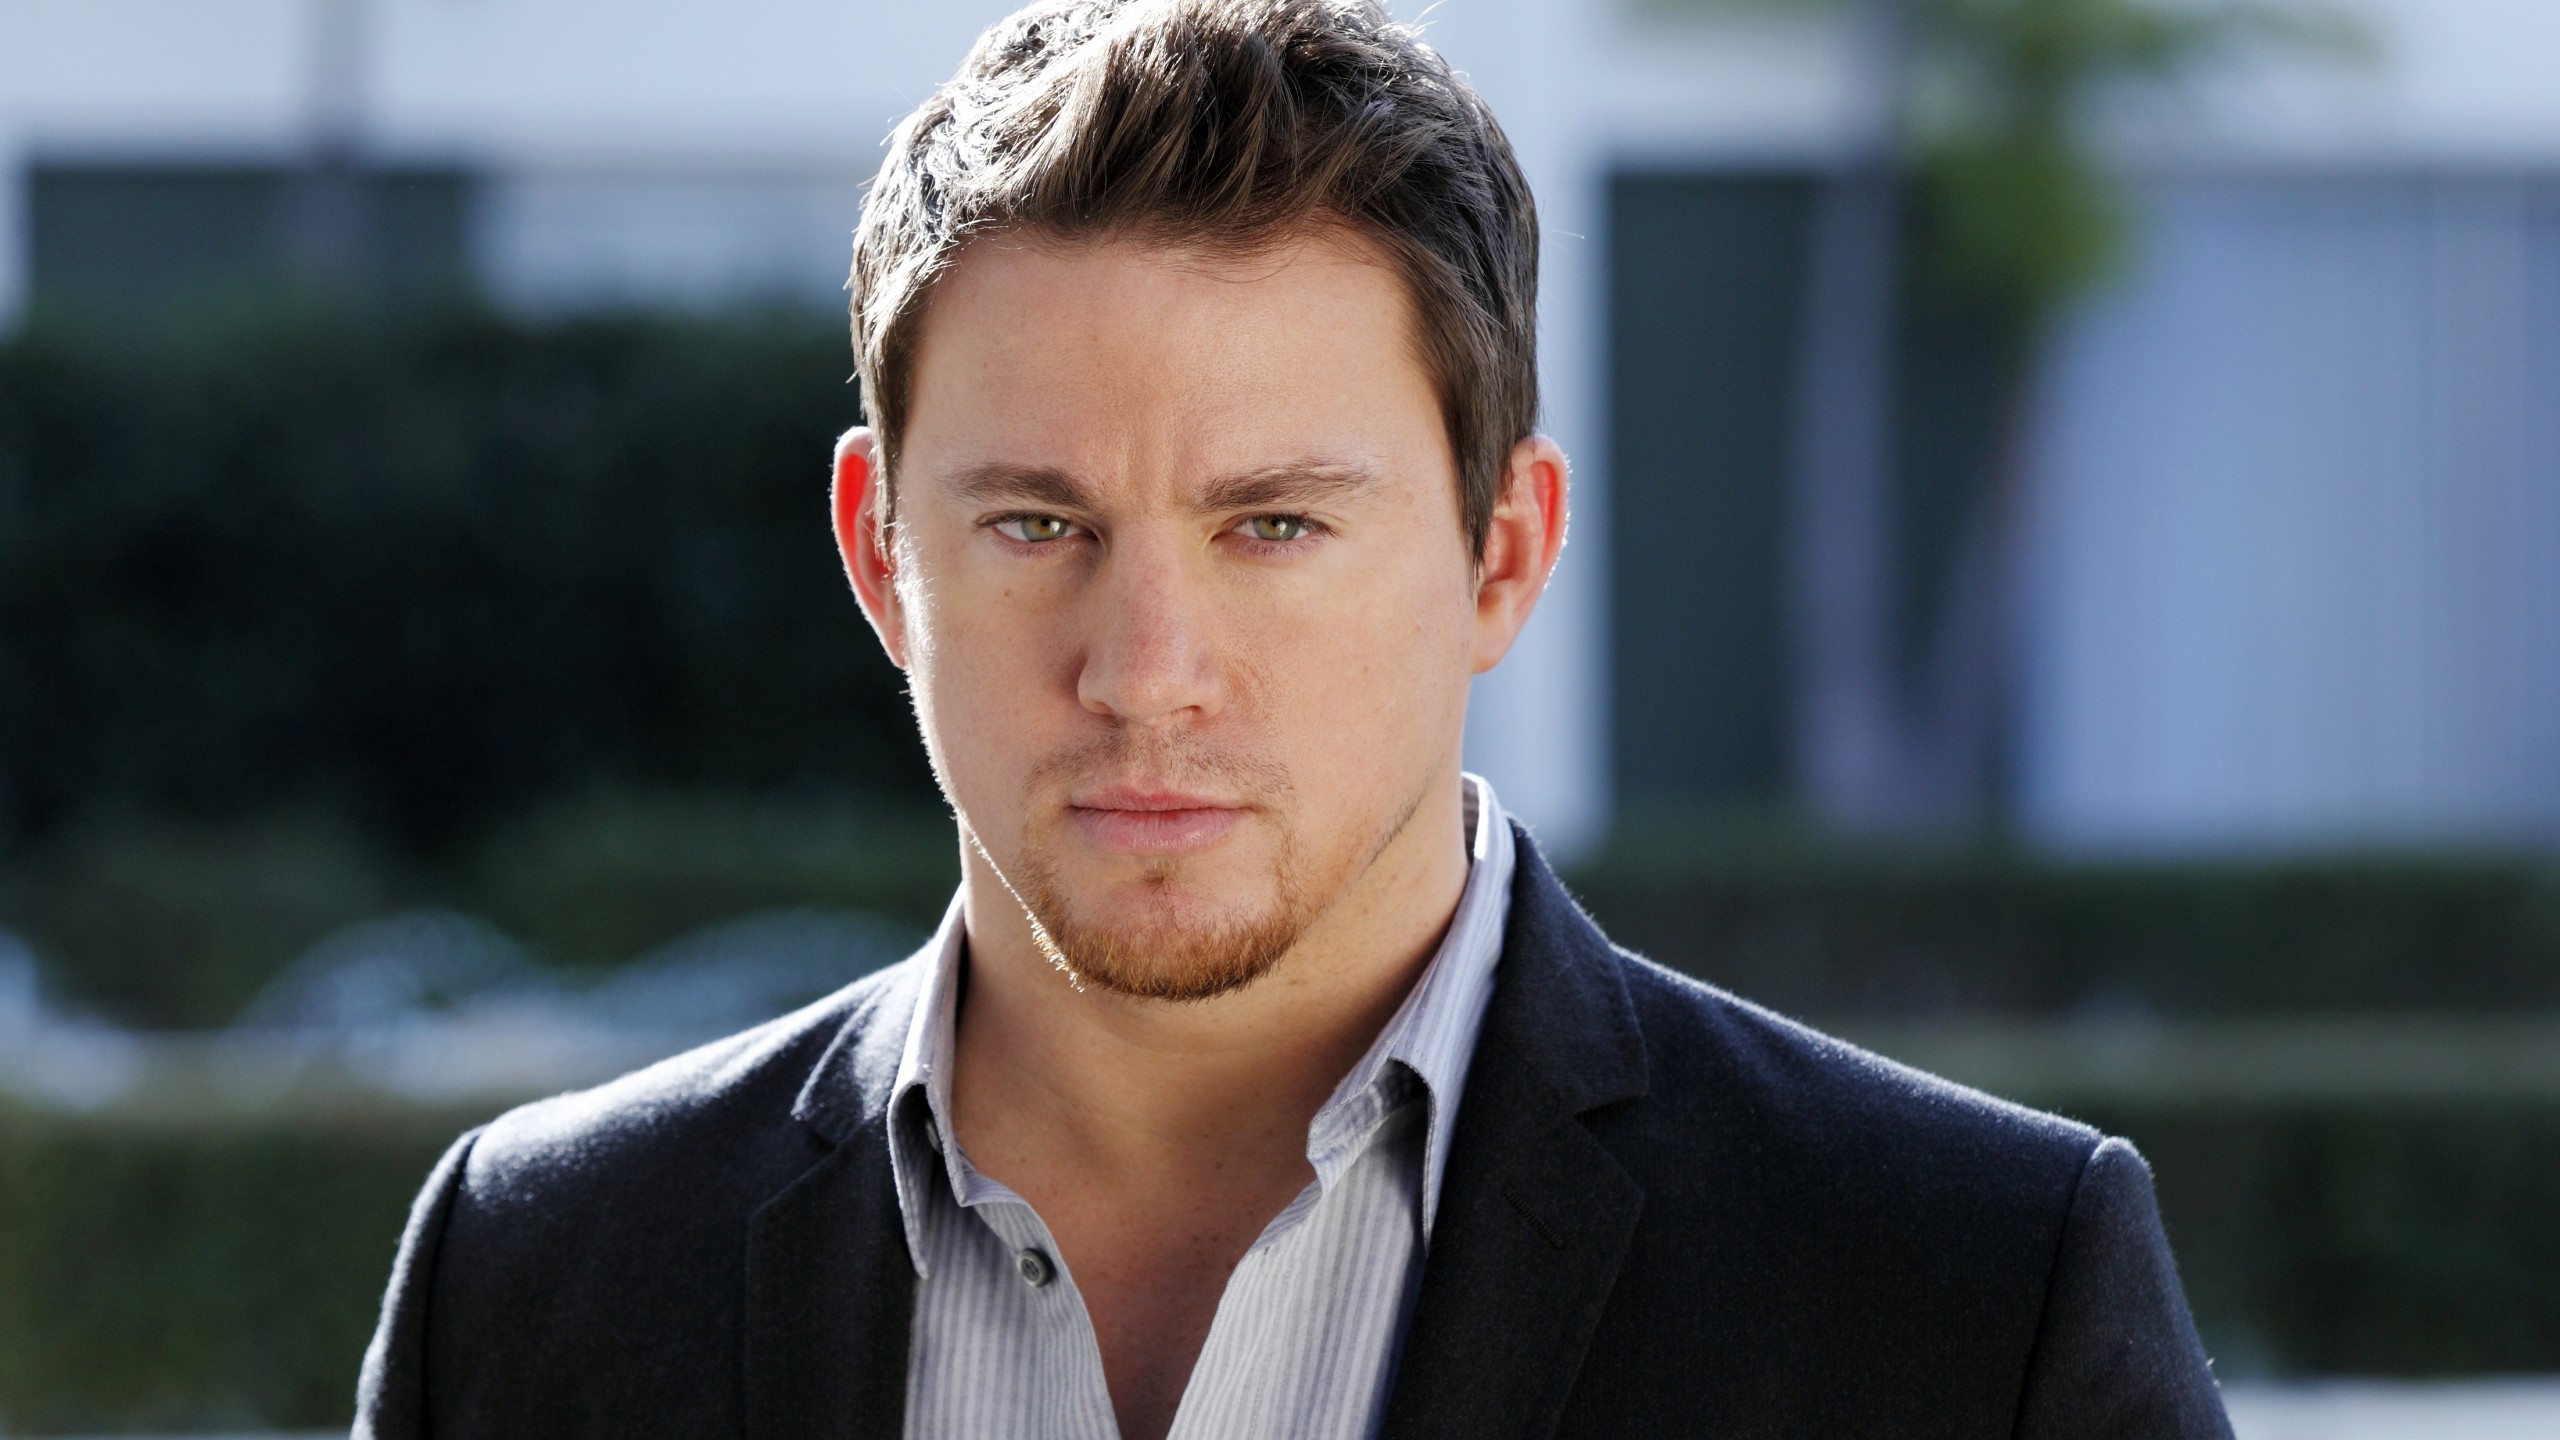 Channing Tatum: Portrayed Shawn MacArthur in a 2009 sports action film, Fighting. 2560x1440 HD Wallpaper.